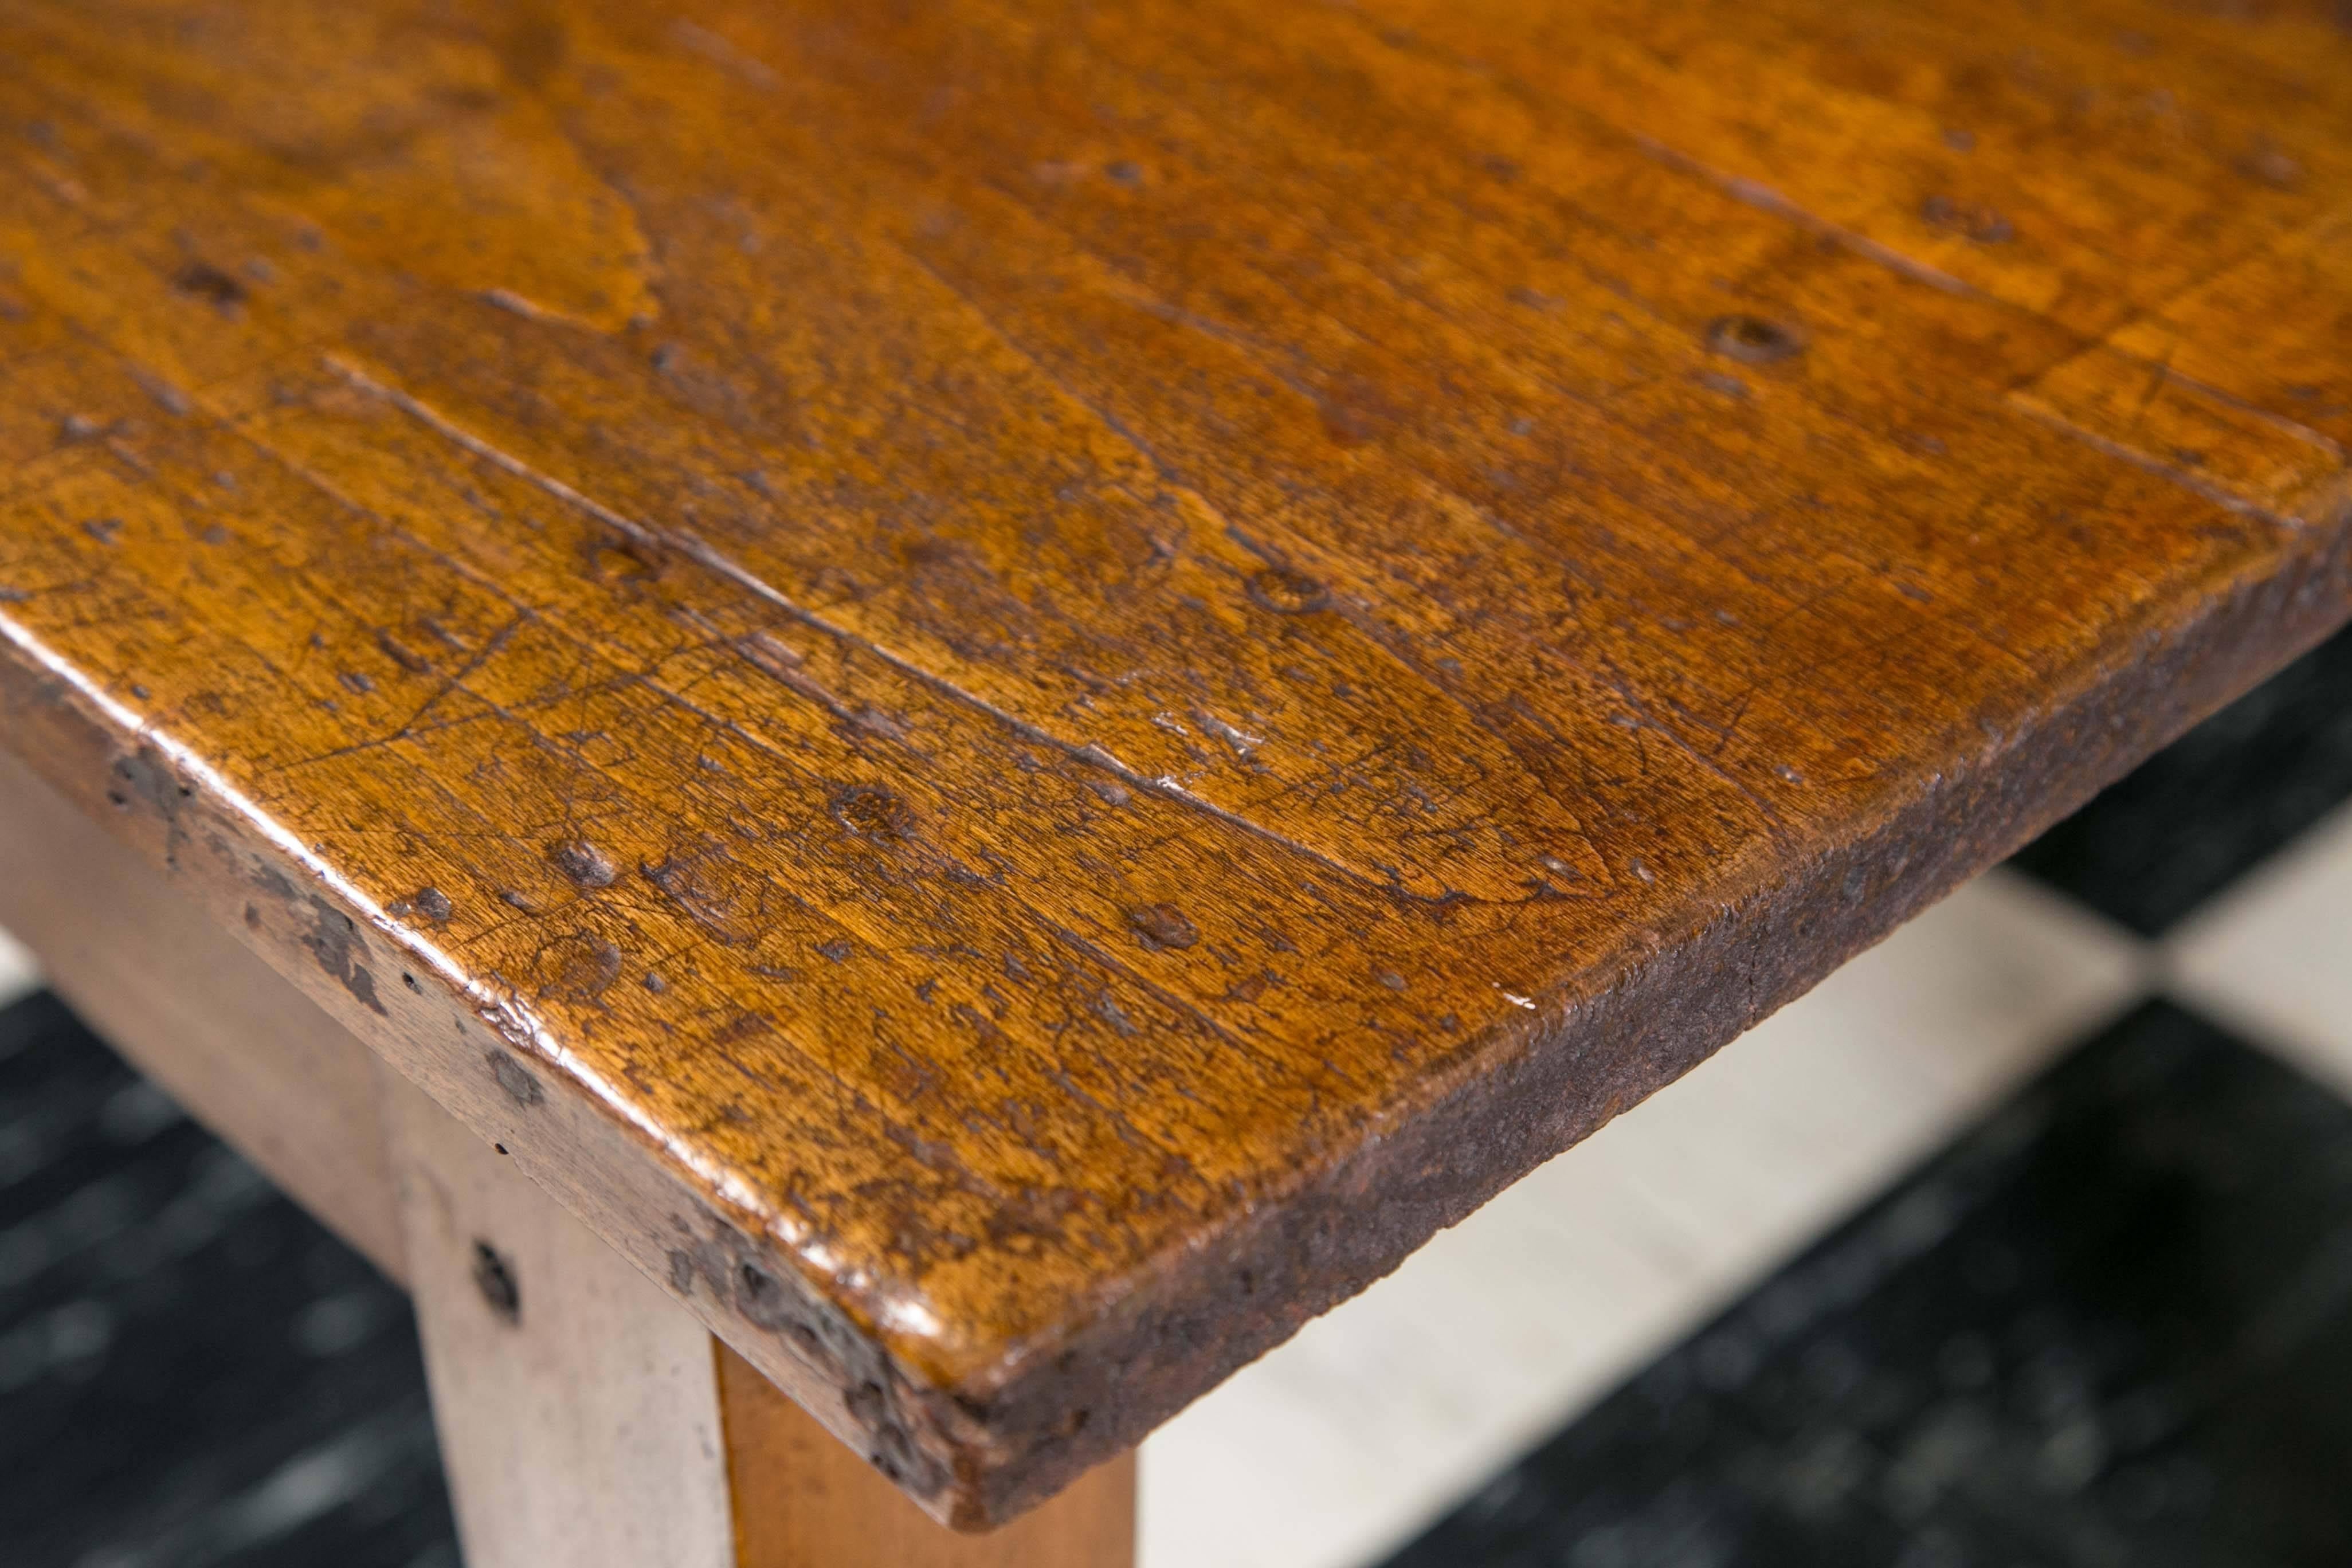 19th century French farm table in poplar. Thick, three-board top rests on sturdy tapered legs. Period peg construction. Aged top gives great character to the table.